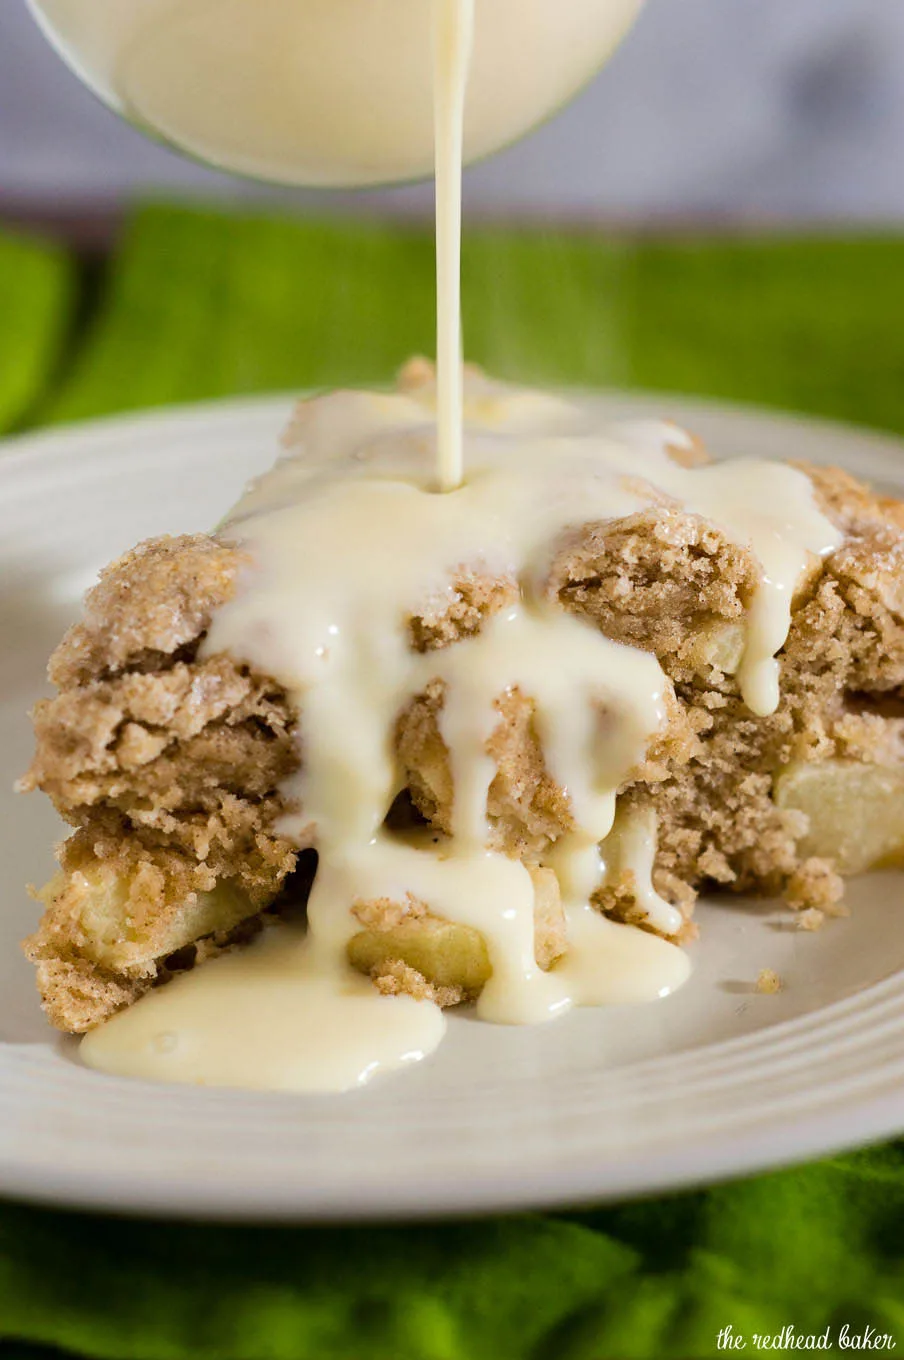 Irish apple cake has a scone-like texture and is studded with chopped apples. Serve with vanilla sauce for a delicious dessert.